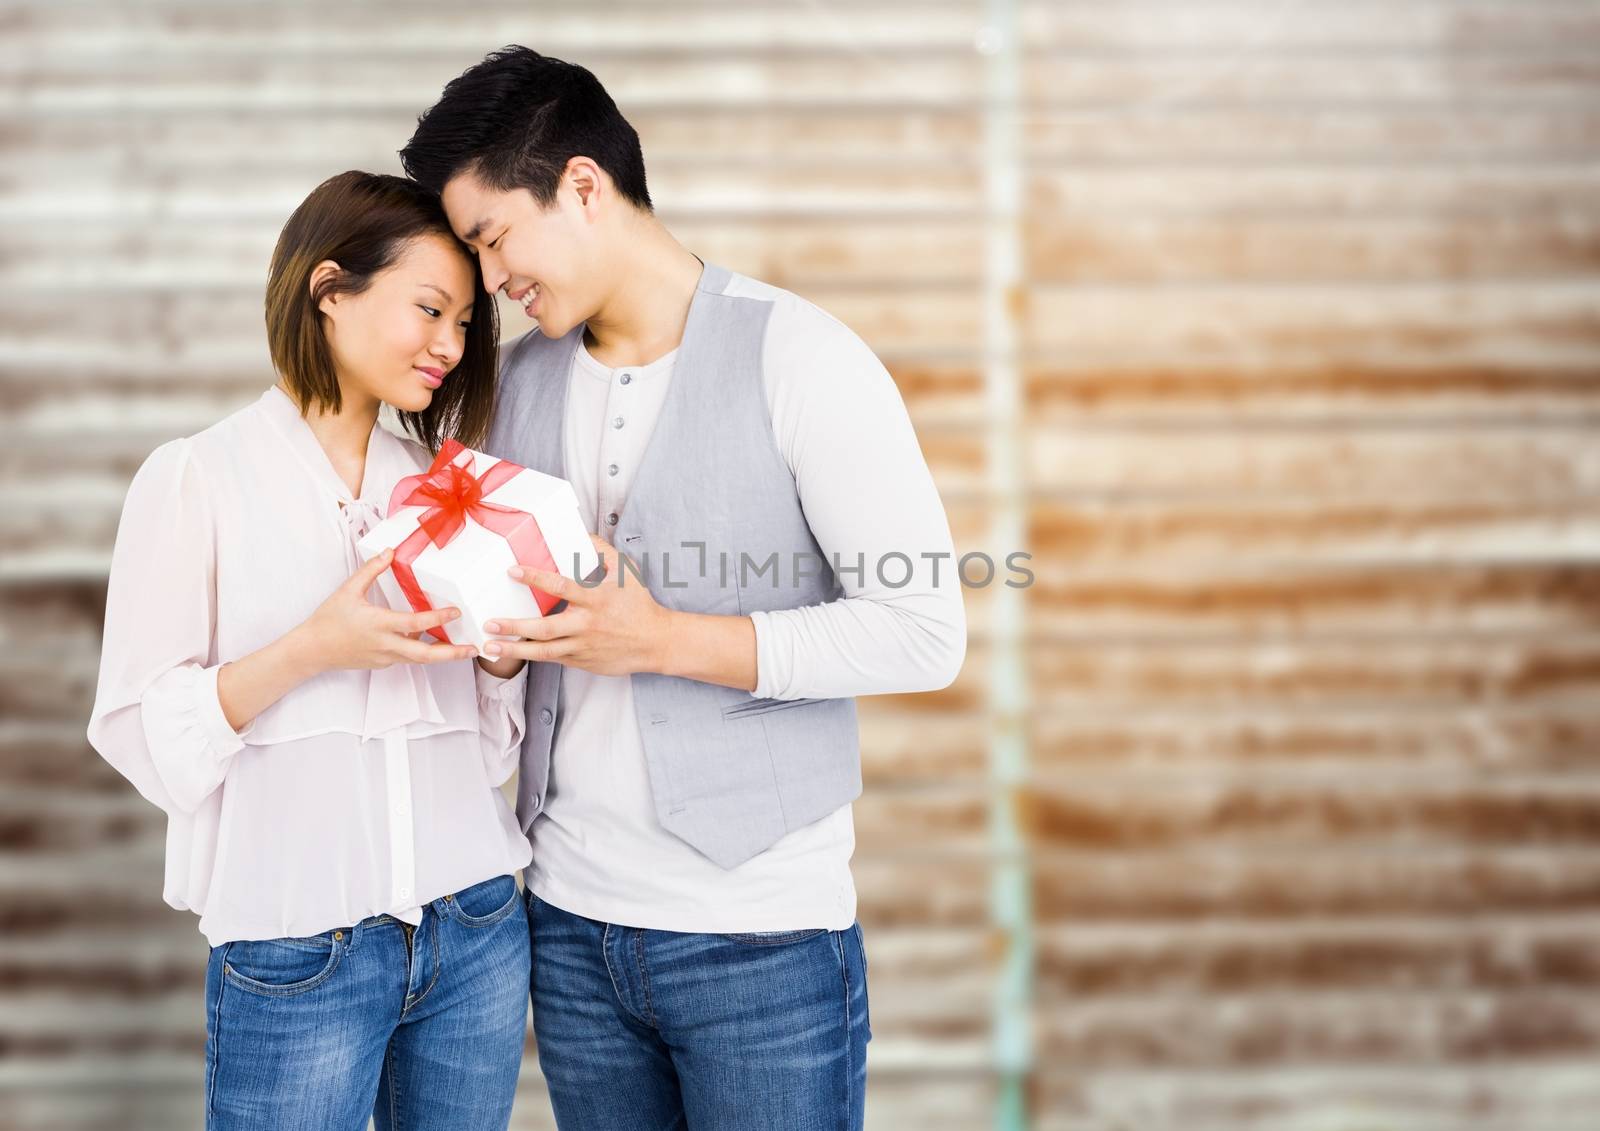 Romantic couple holding gift box against digital composite background